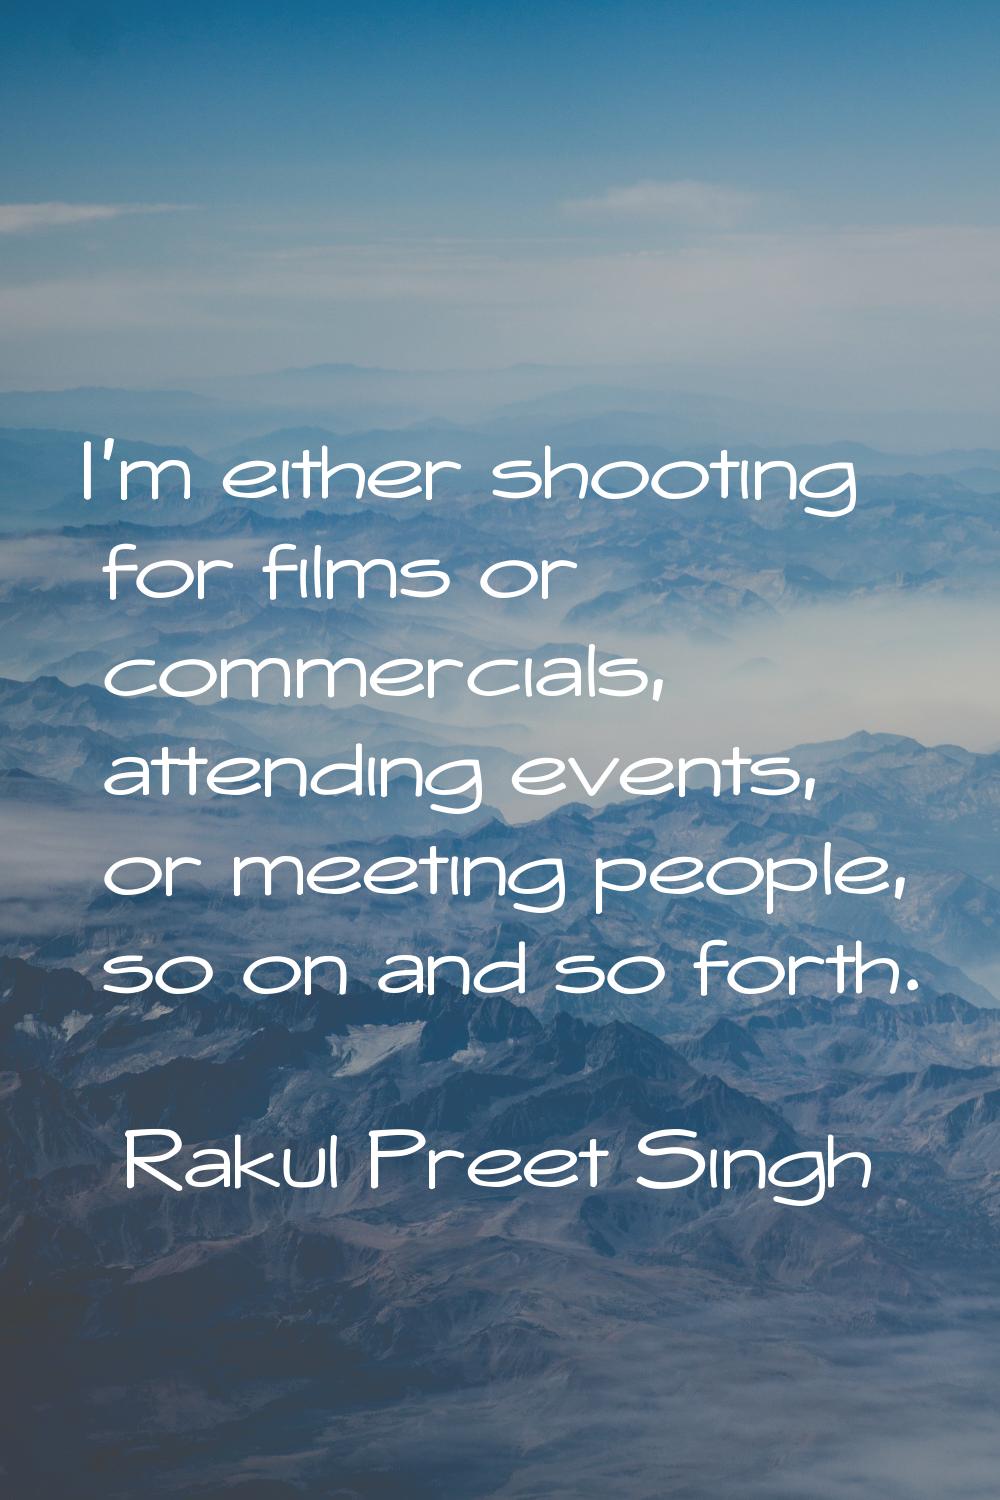 I'm either shooting for films or commercials, attending events, or meeting people, so on and so for